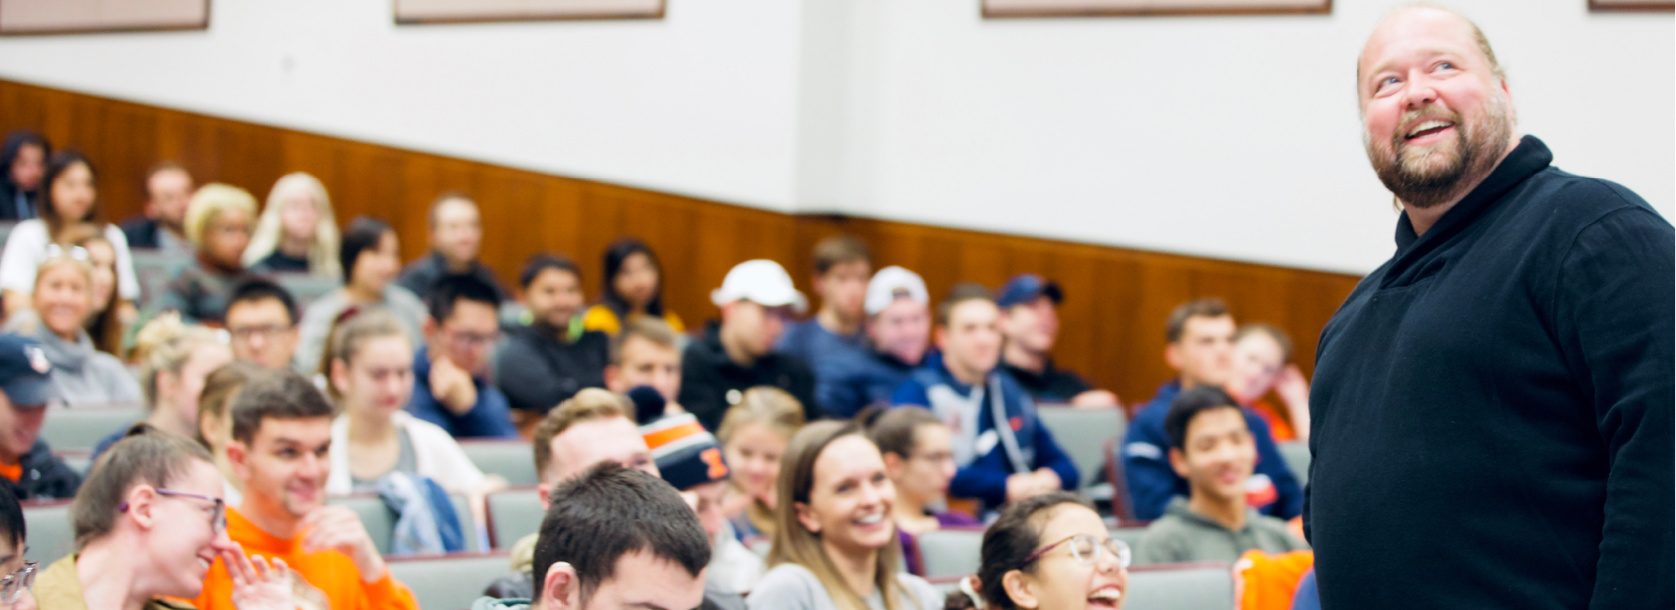 BADM Marketing Header - students attending a lecture